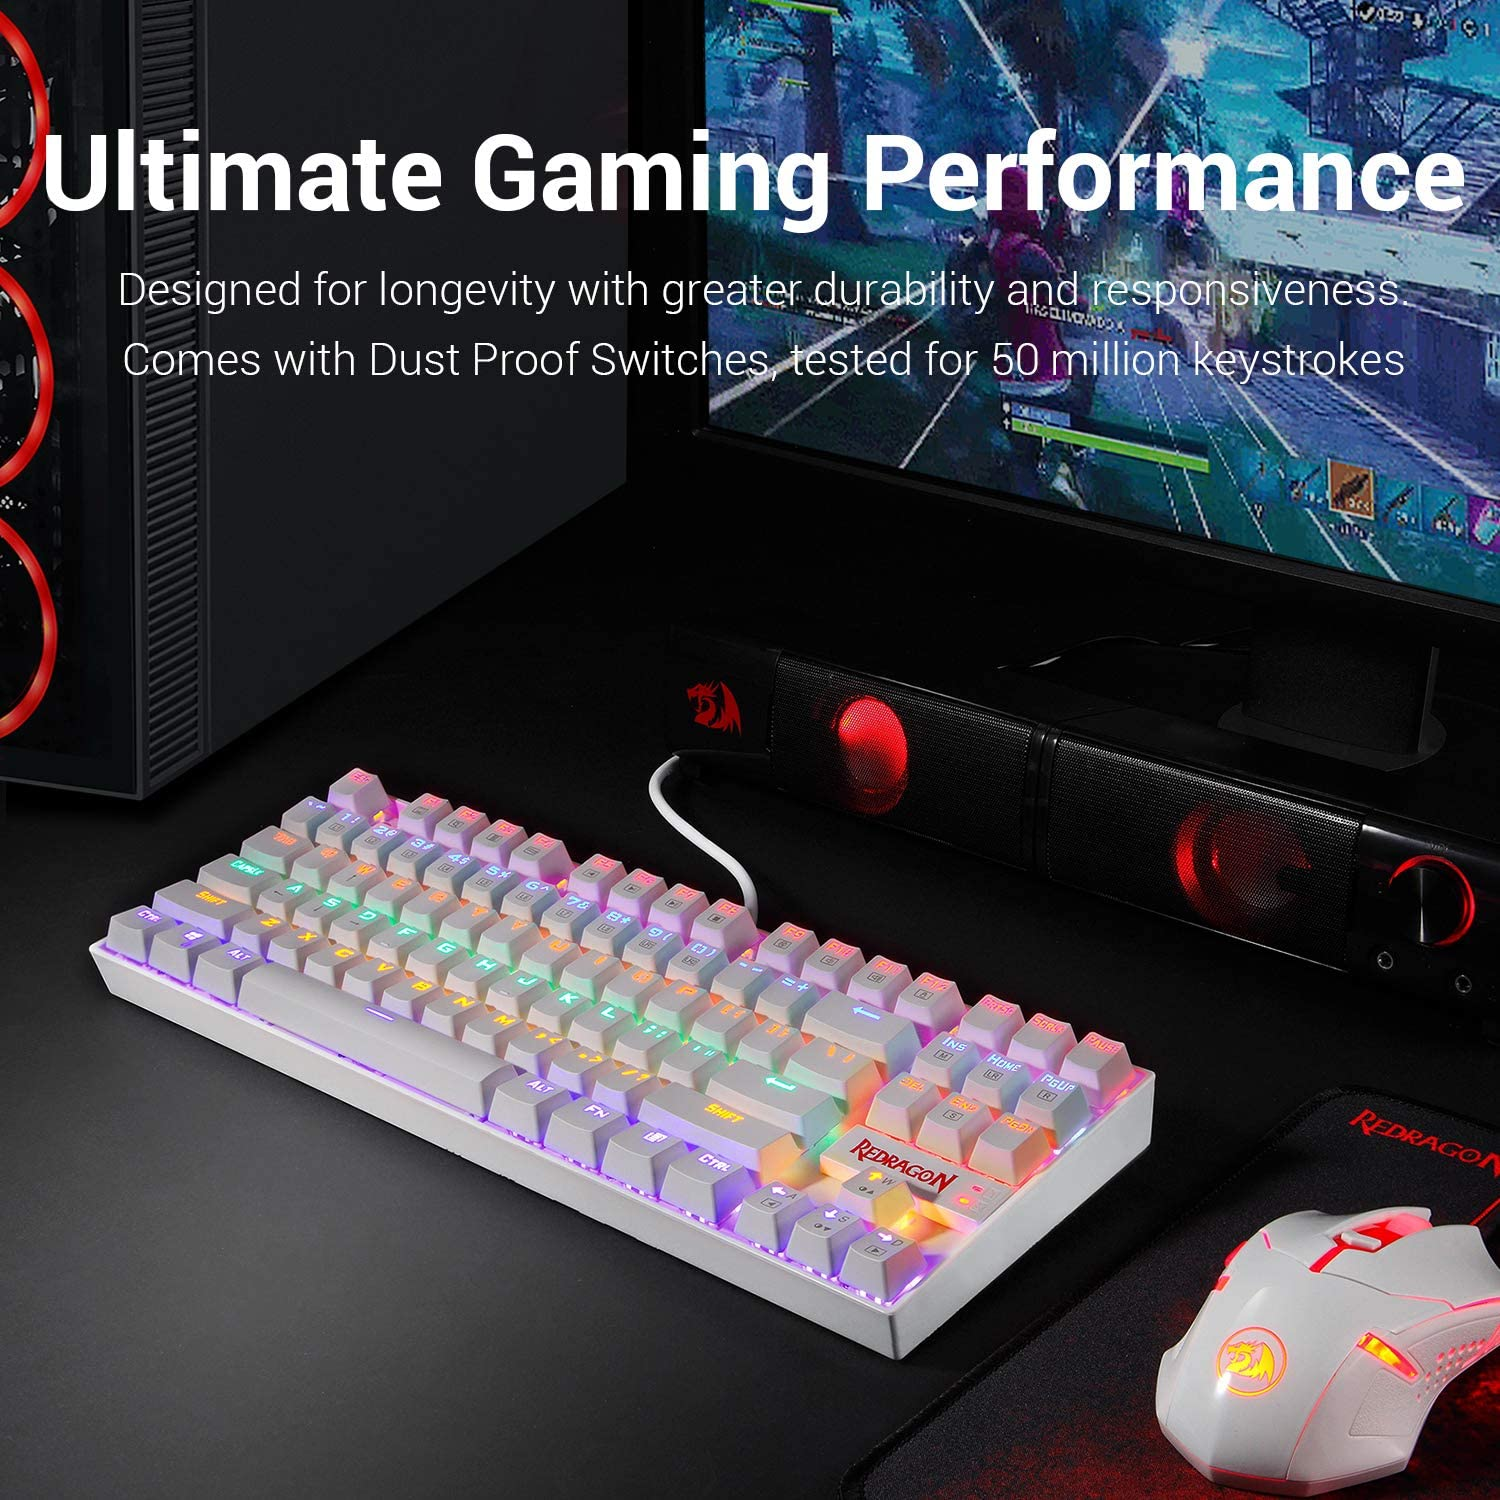 High Quality Redragon K630 Rainbow Wired Mechanical Gaming